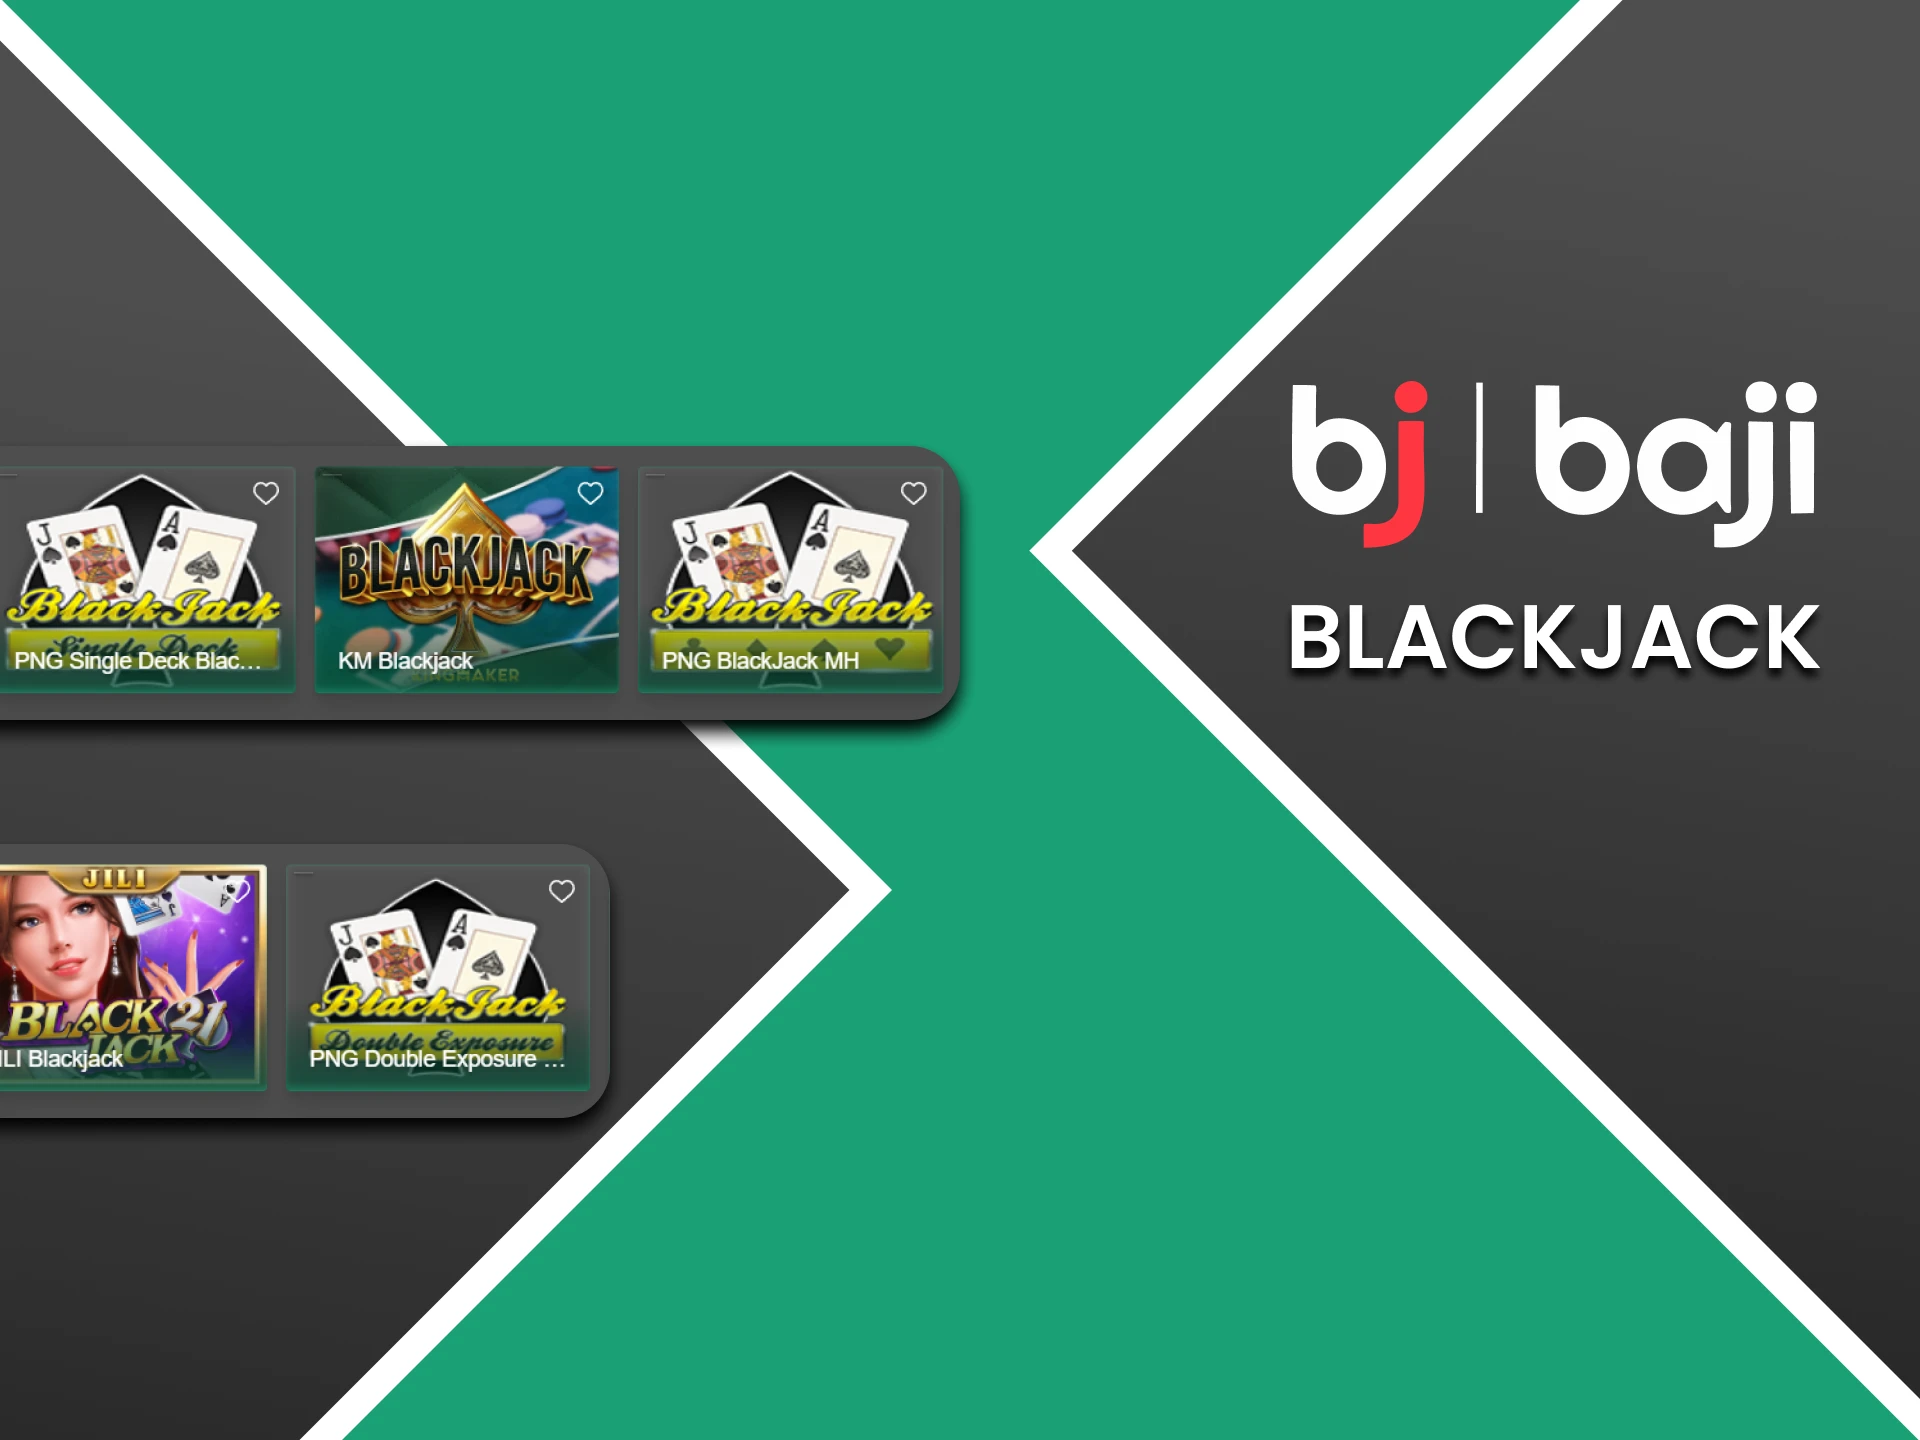 In the table games section from Baji you can play Blackjack.